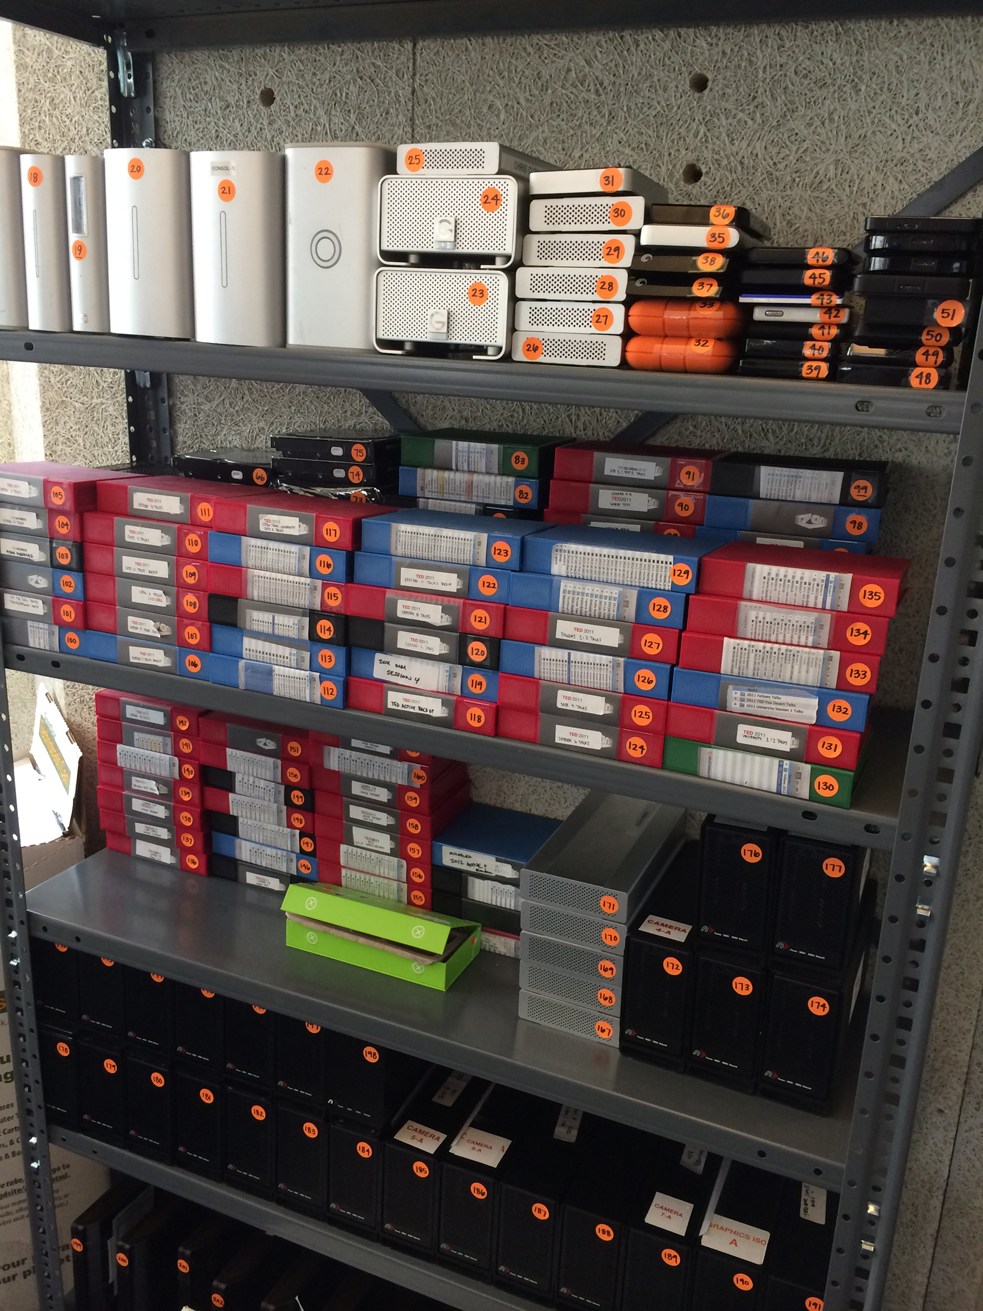 A look at one shelf of our drive and tape library. Photo: Michael Glass